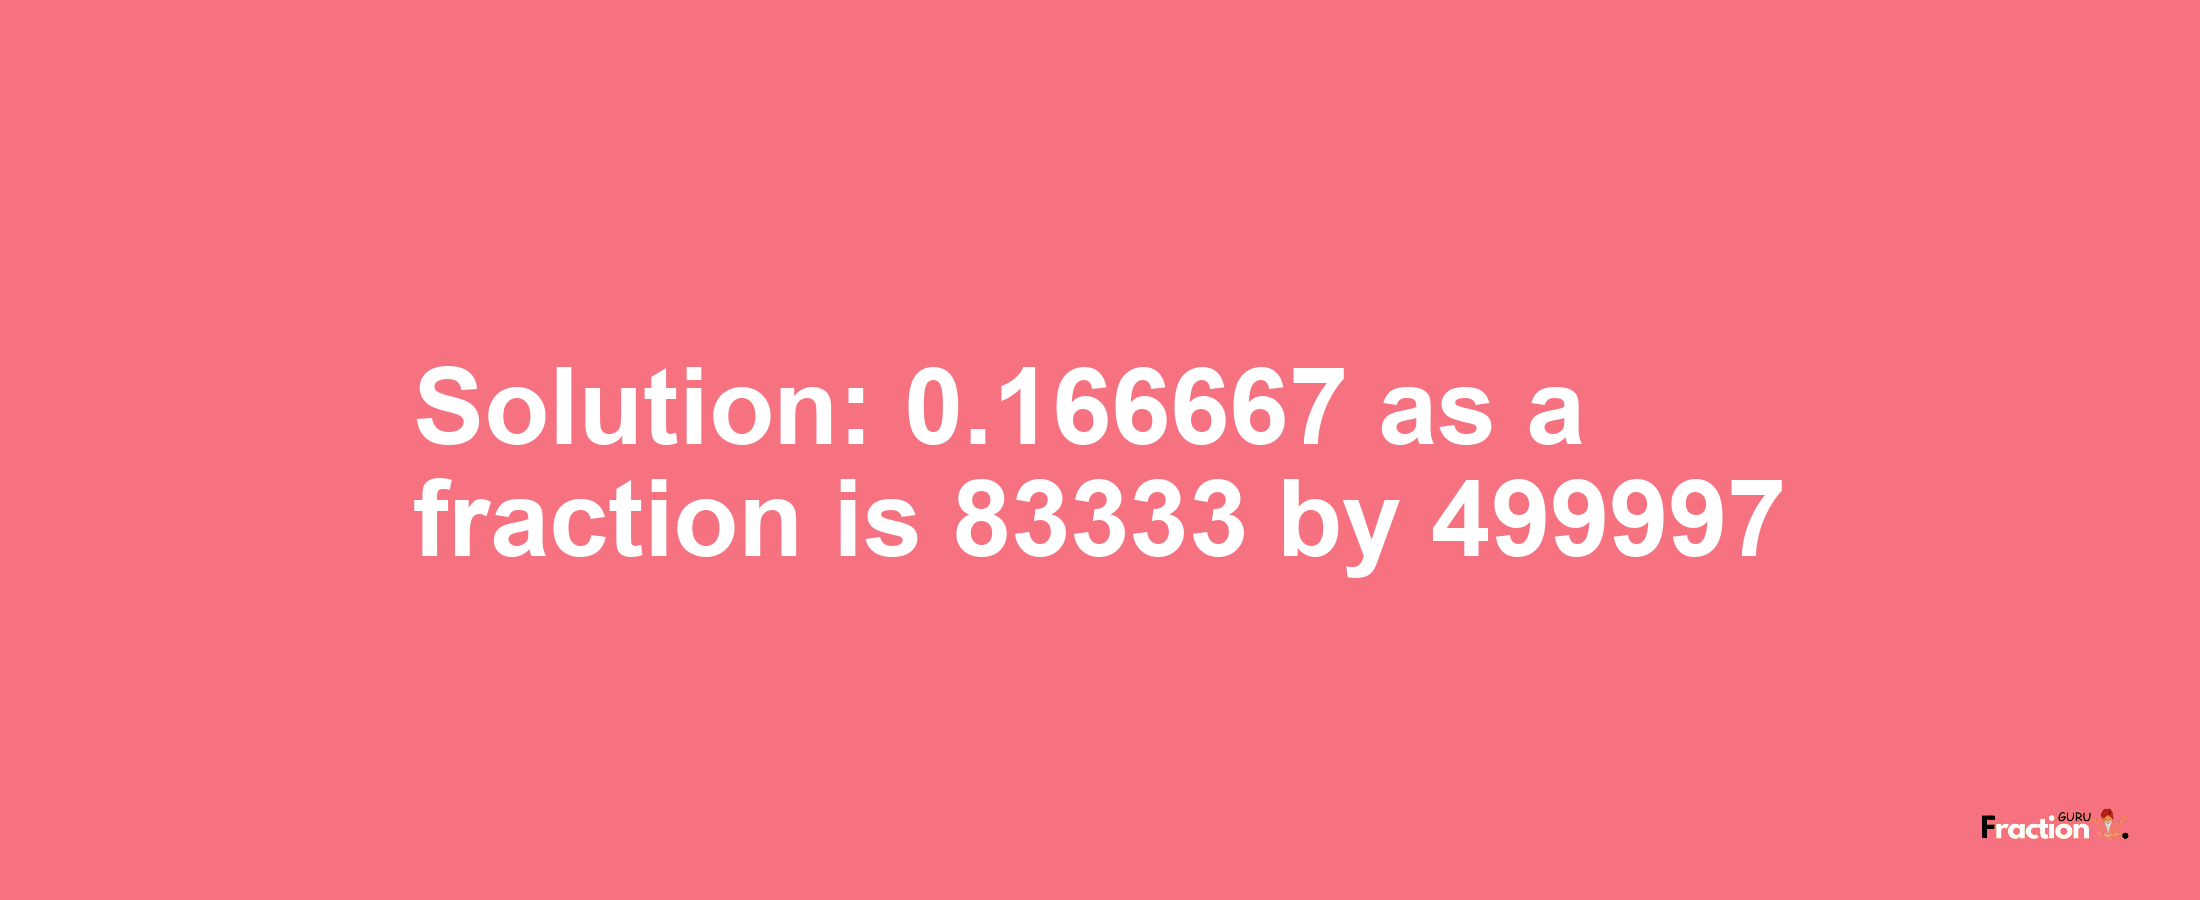 Solution:0.166667 as a fraction is 83333/499997